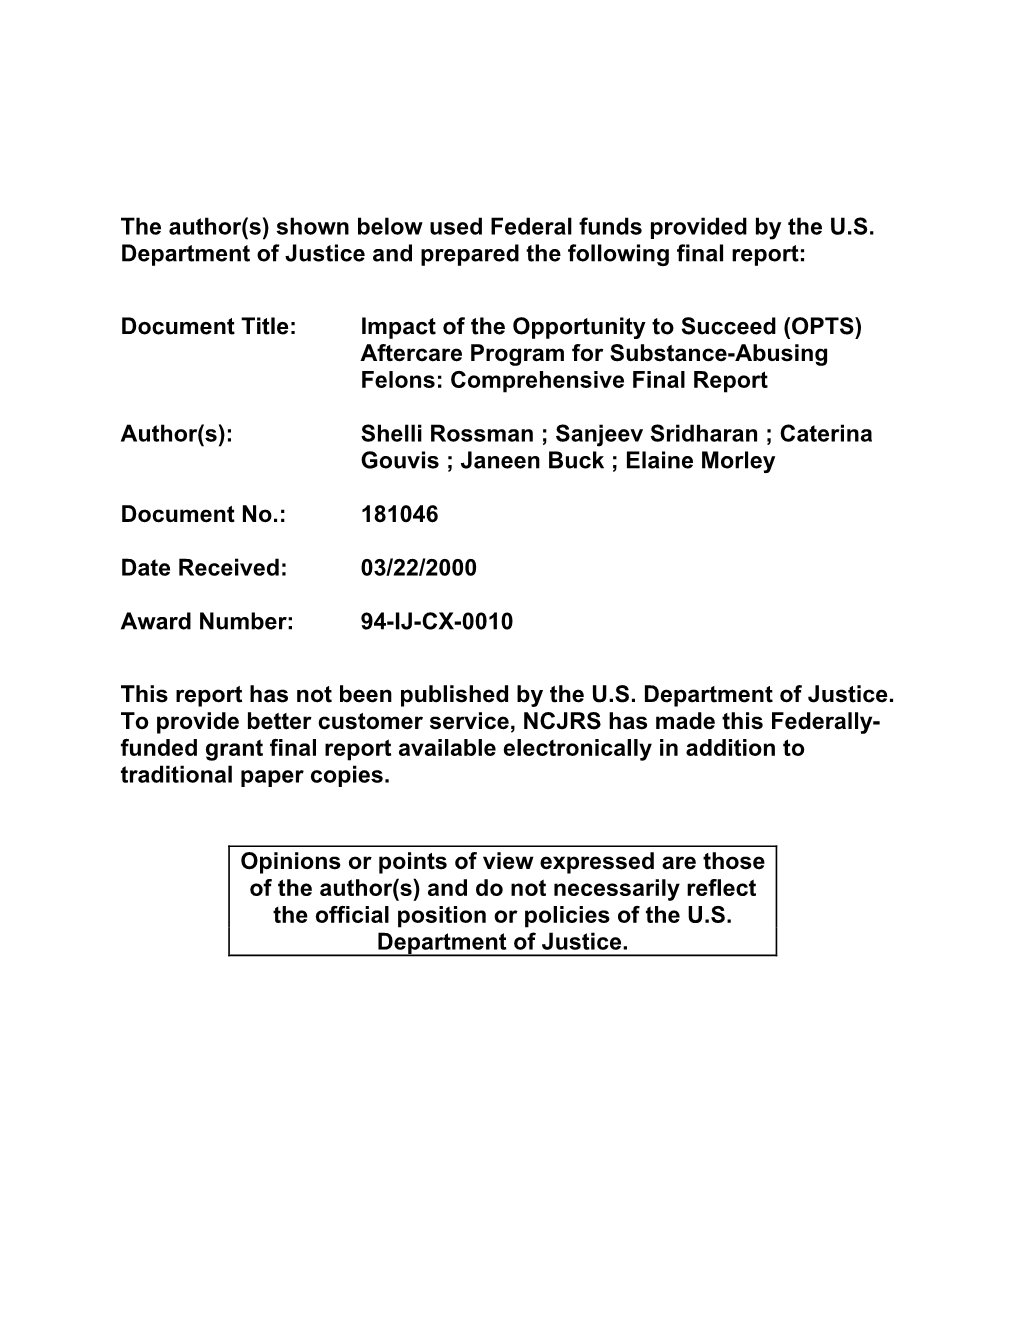 (OPTS) Aftercare Program for Substance-Abusing Felons: Comprehensive Final Report